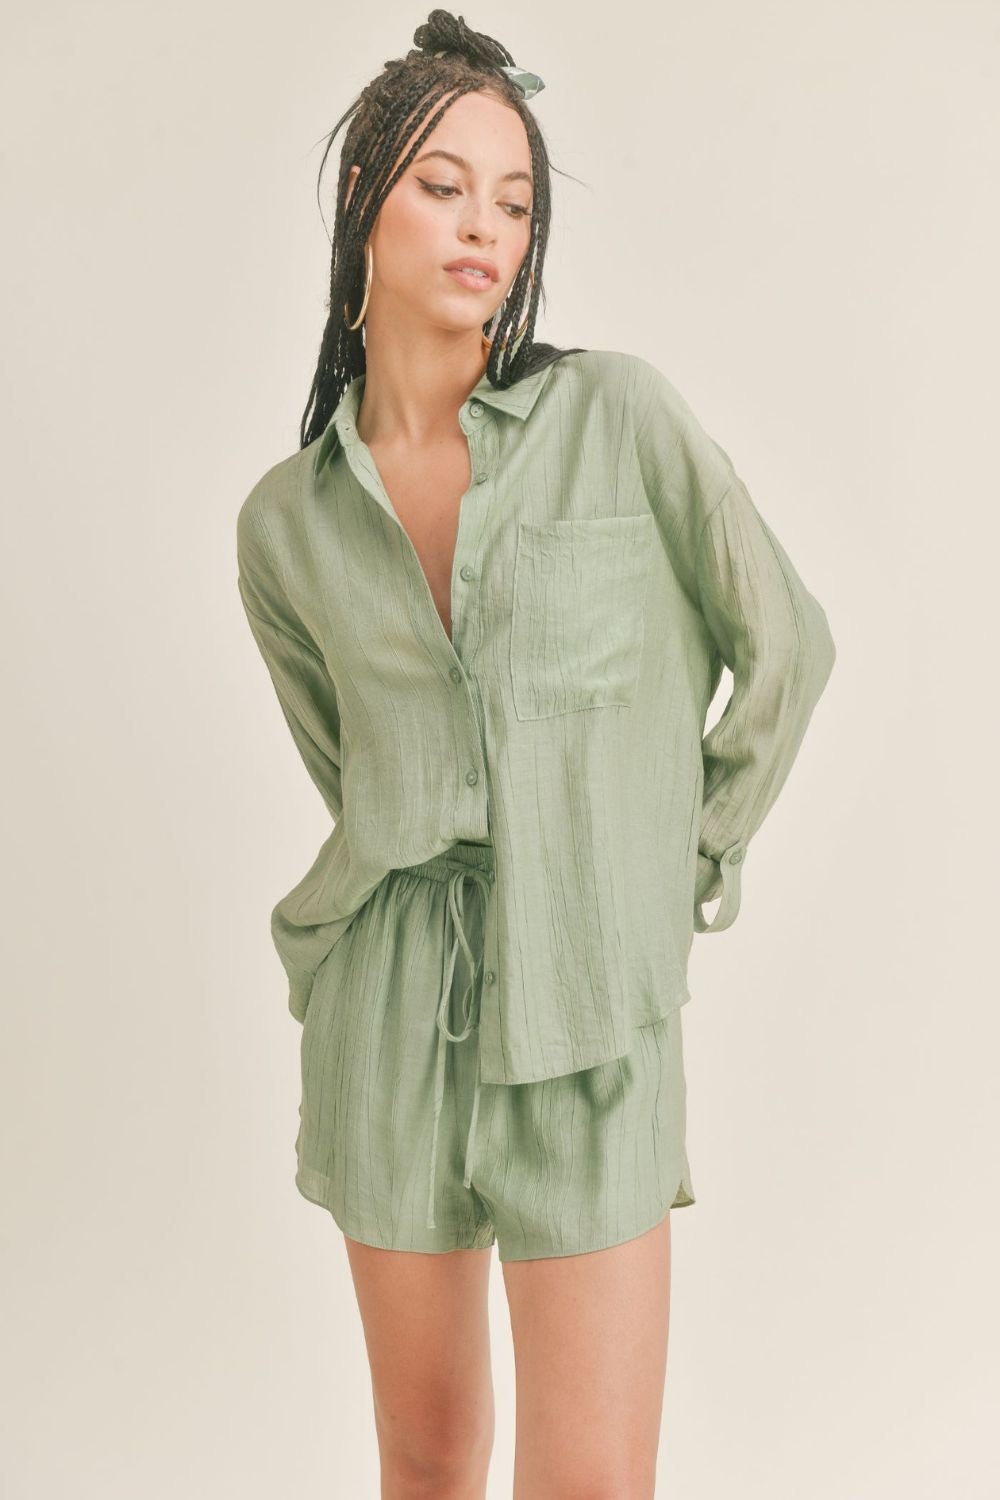 Sage The Label | Long Sleeve Button Down Top | Pistachio Green - Women's Shirts & Tops - Blooming Daily